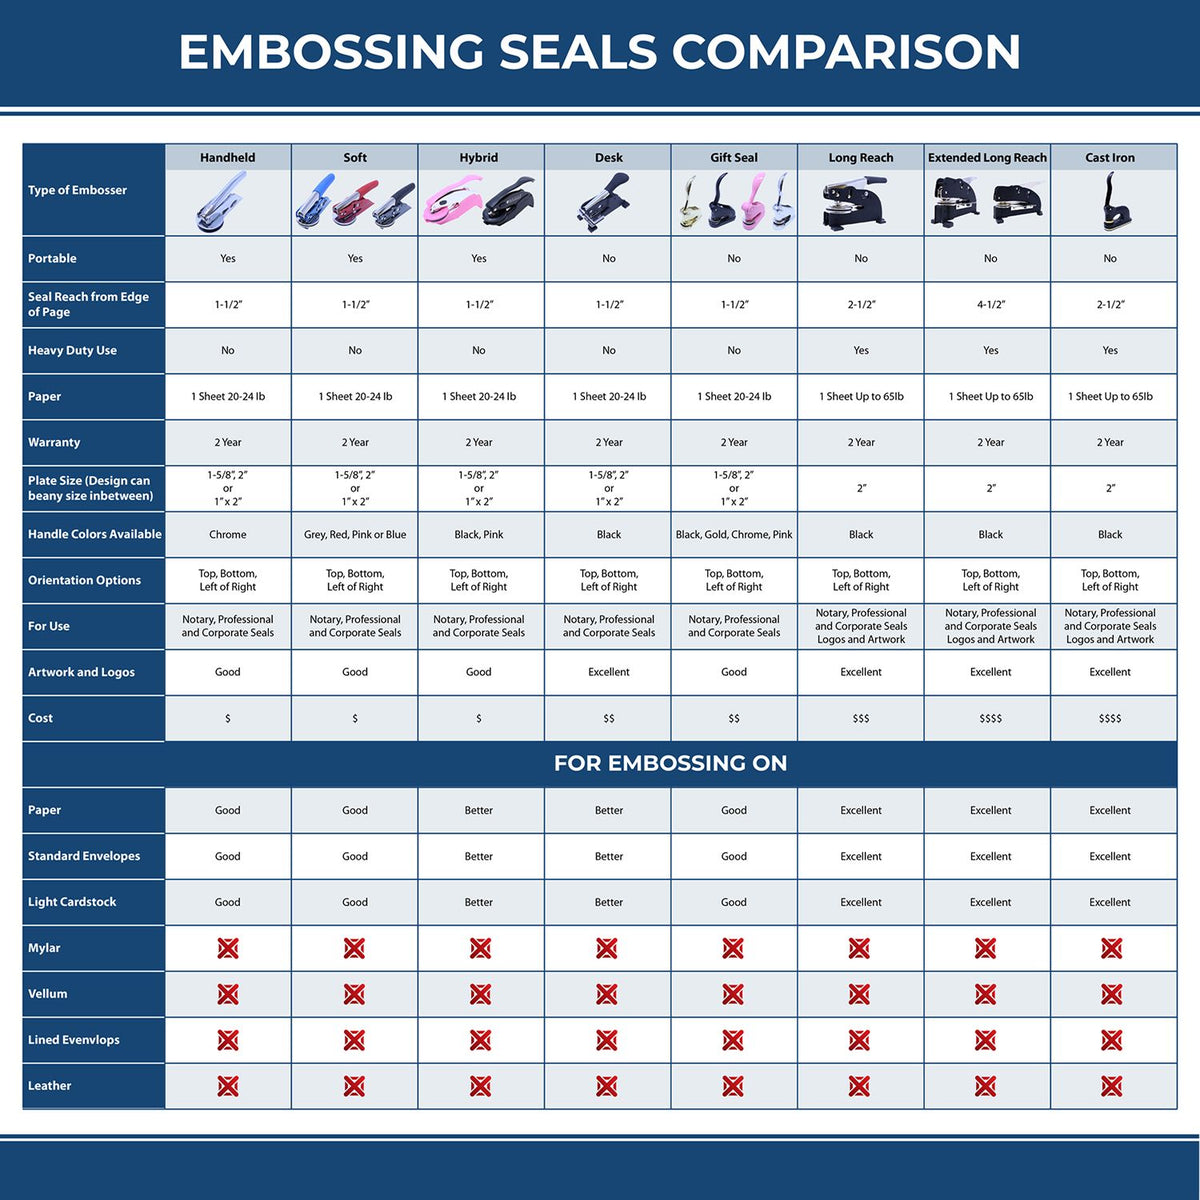 A comparison chart for the different types of mount models available for the Handheld Missouri Land Surveyor Seal.